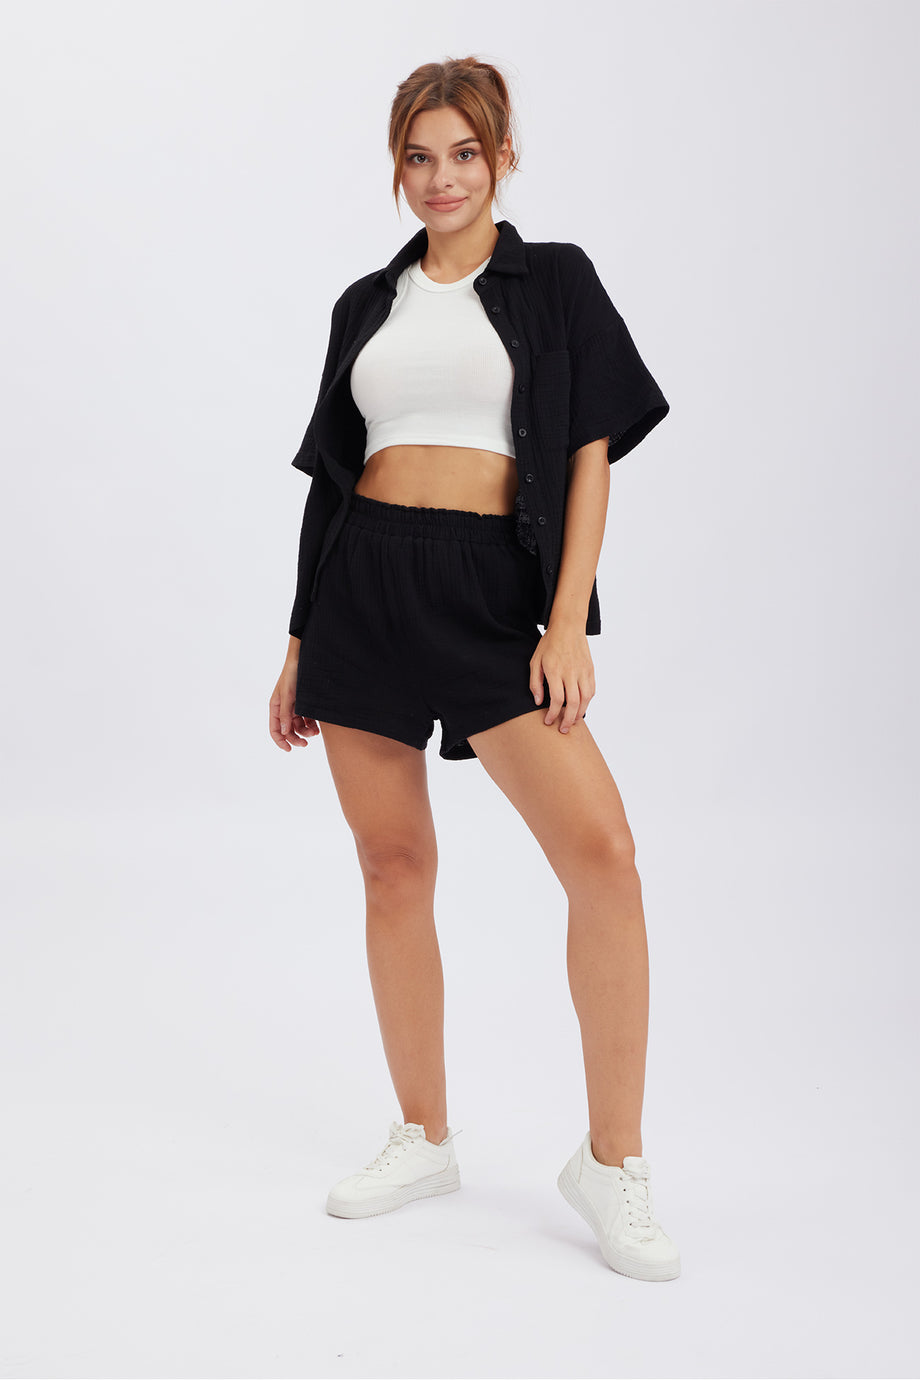 2 Piece Buttery Smooth Basic Solid Biker Shorts and T-Shirt Set